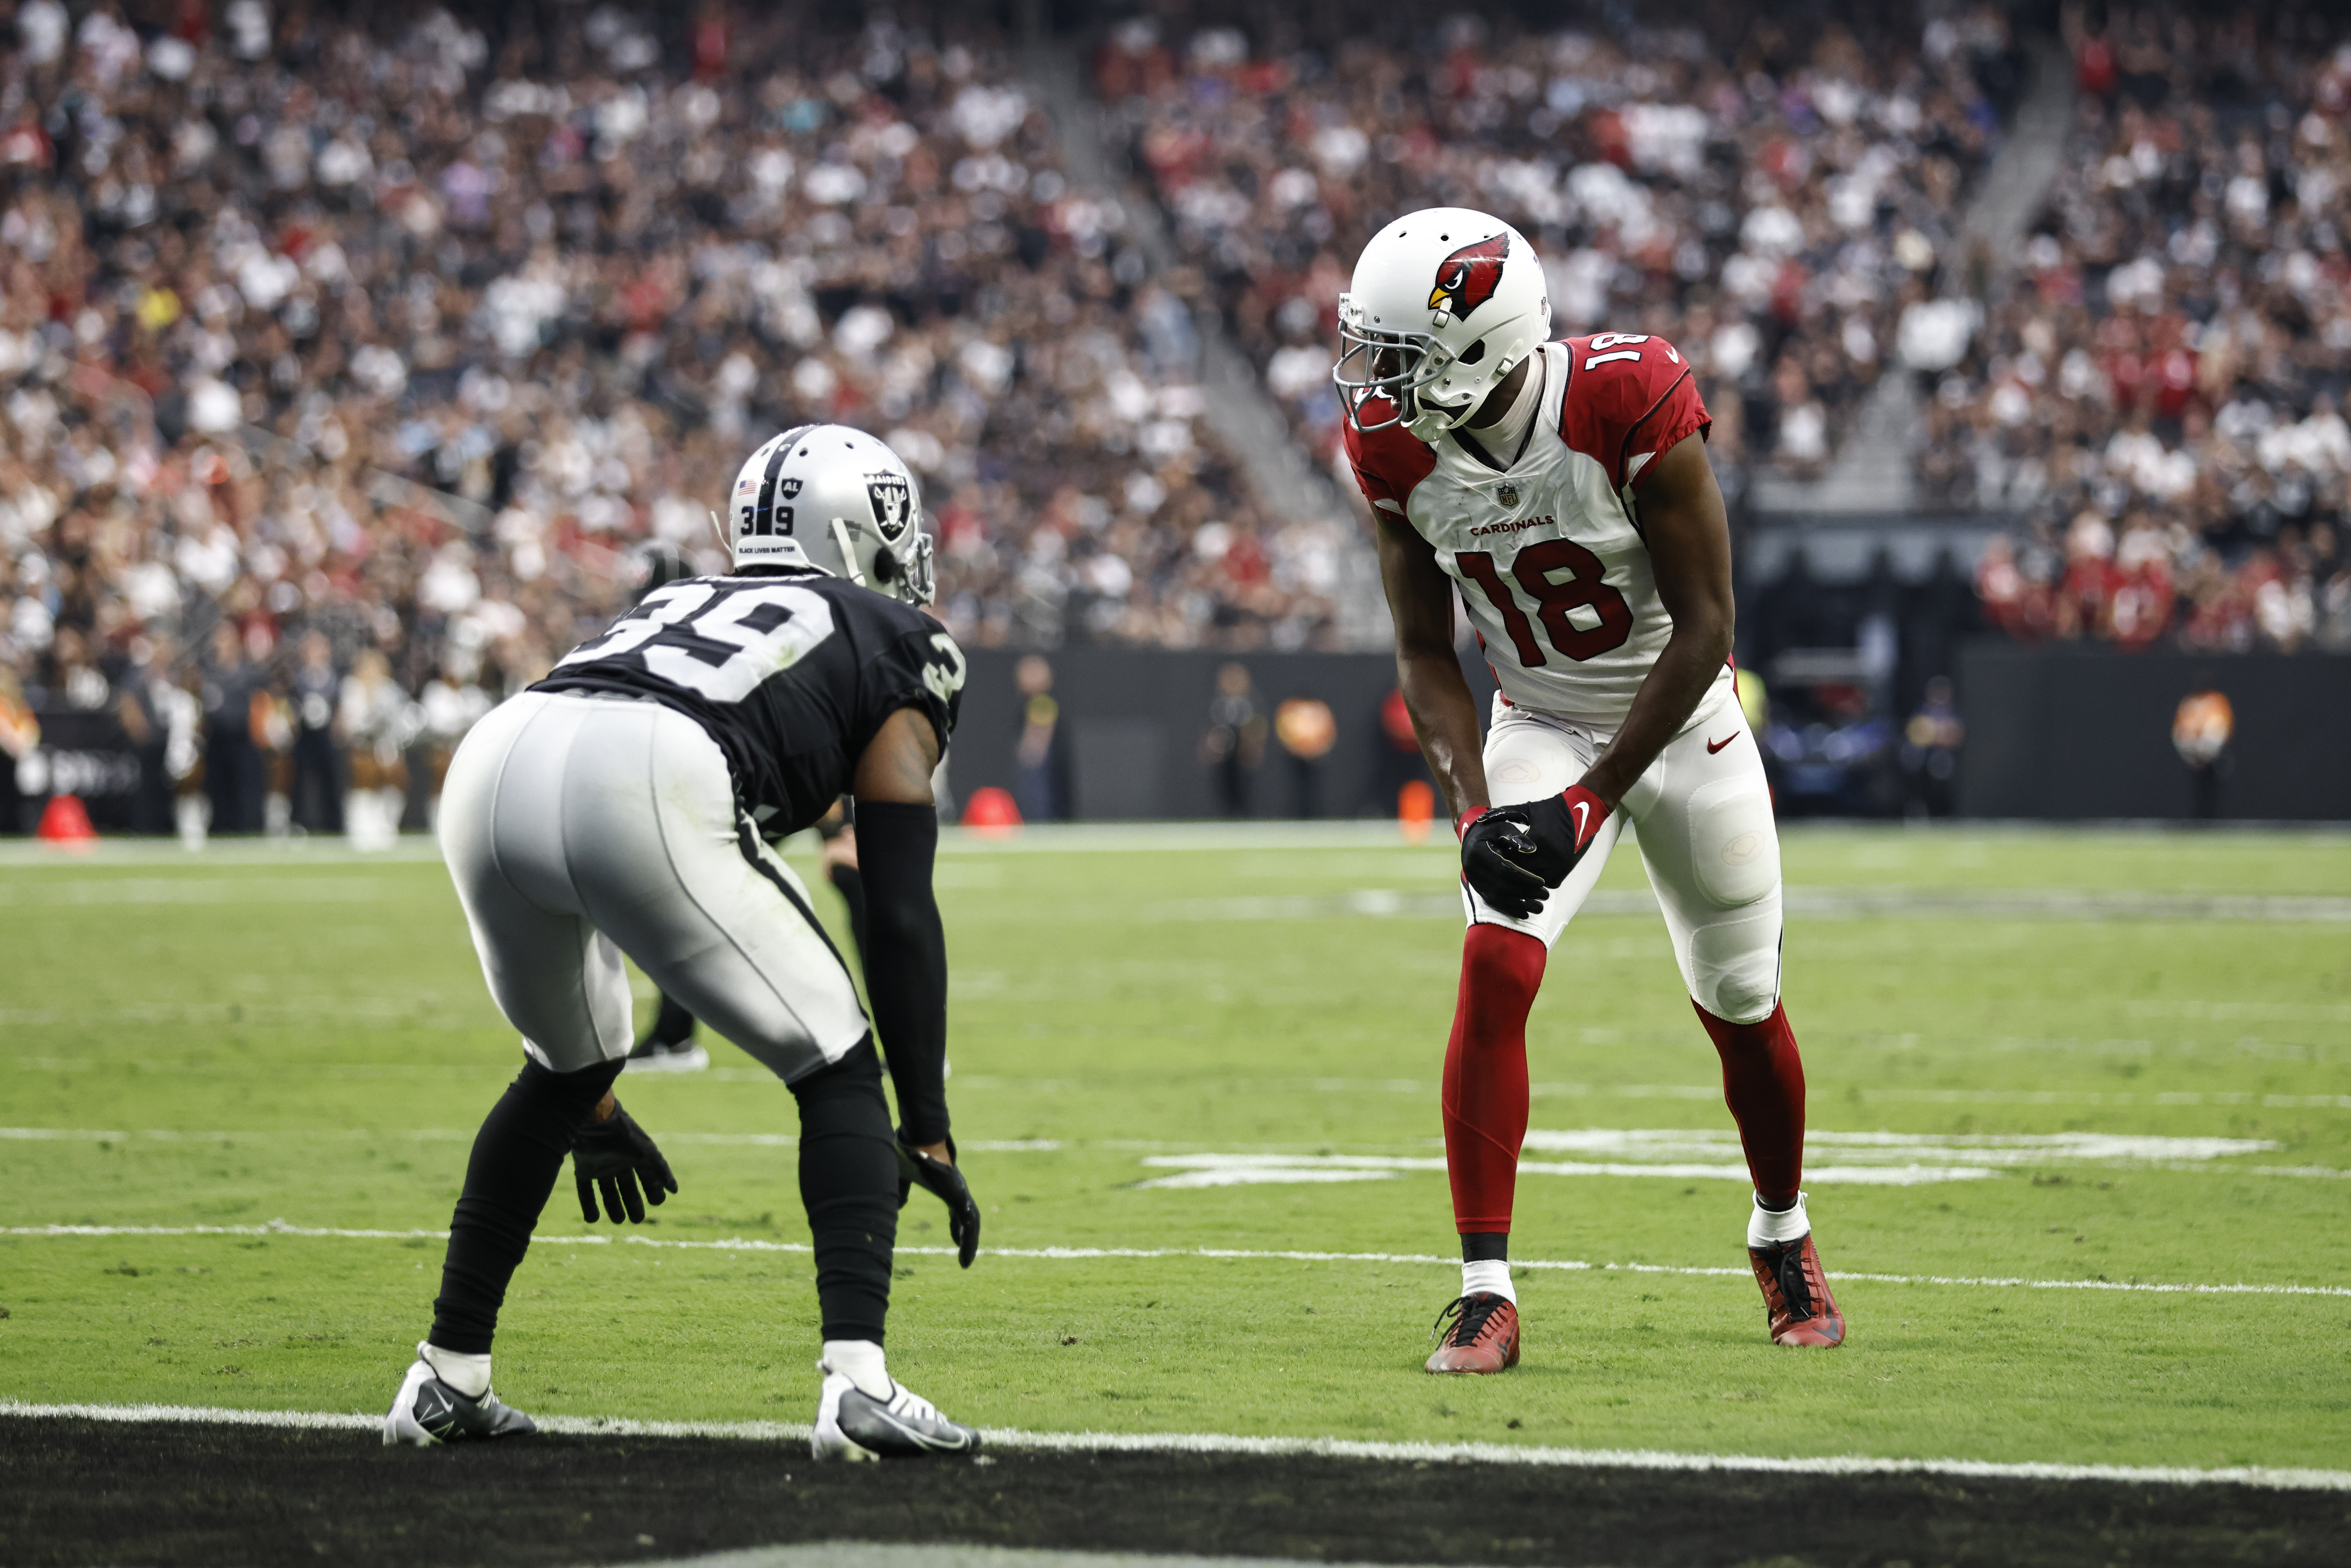 A.J. Green #18 of the Arizona Cardinals lines up against Nate Hobbs #39 of the Las Vegas Raiders during an NFL football game between the Las Vegas Raiders and the Arizona Cardinals at Allegiant Stadium on September 18, 2022 in Las Vegas, Nevada.